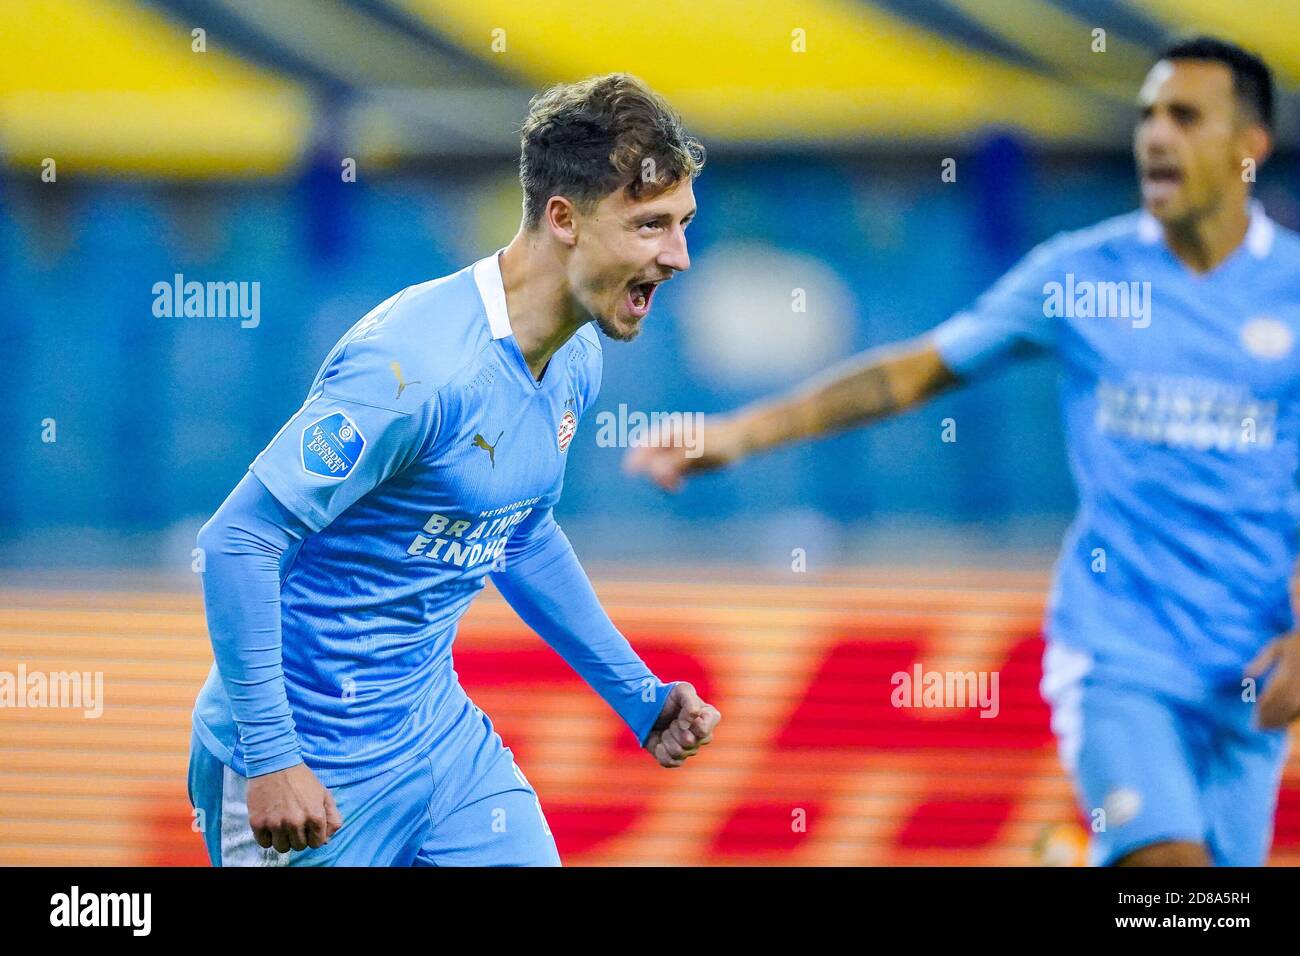 Olivier Boscagli of PSV celebrating his goal during the Netherlands championship Eredivisie football match between Vitesse and PSV on October 25, 20 C Stock Photo